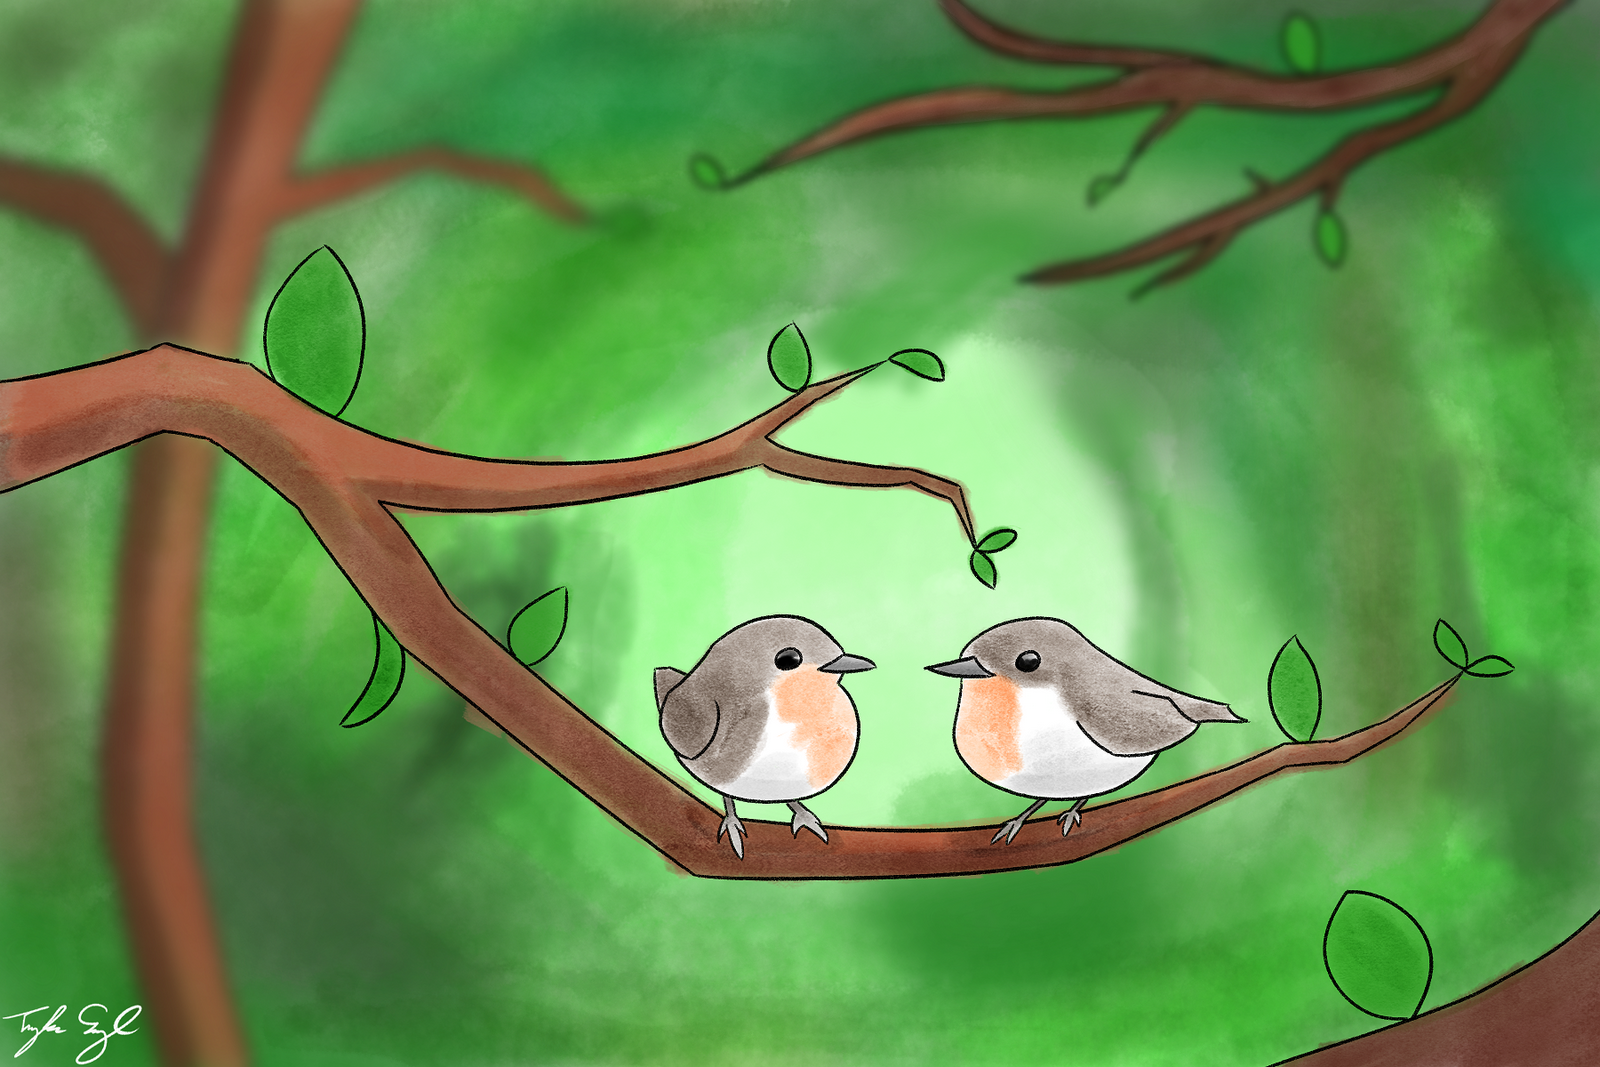 Two brown and white birds with orange round bellies sit on a spindly tree.